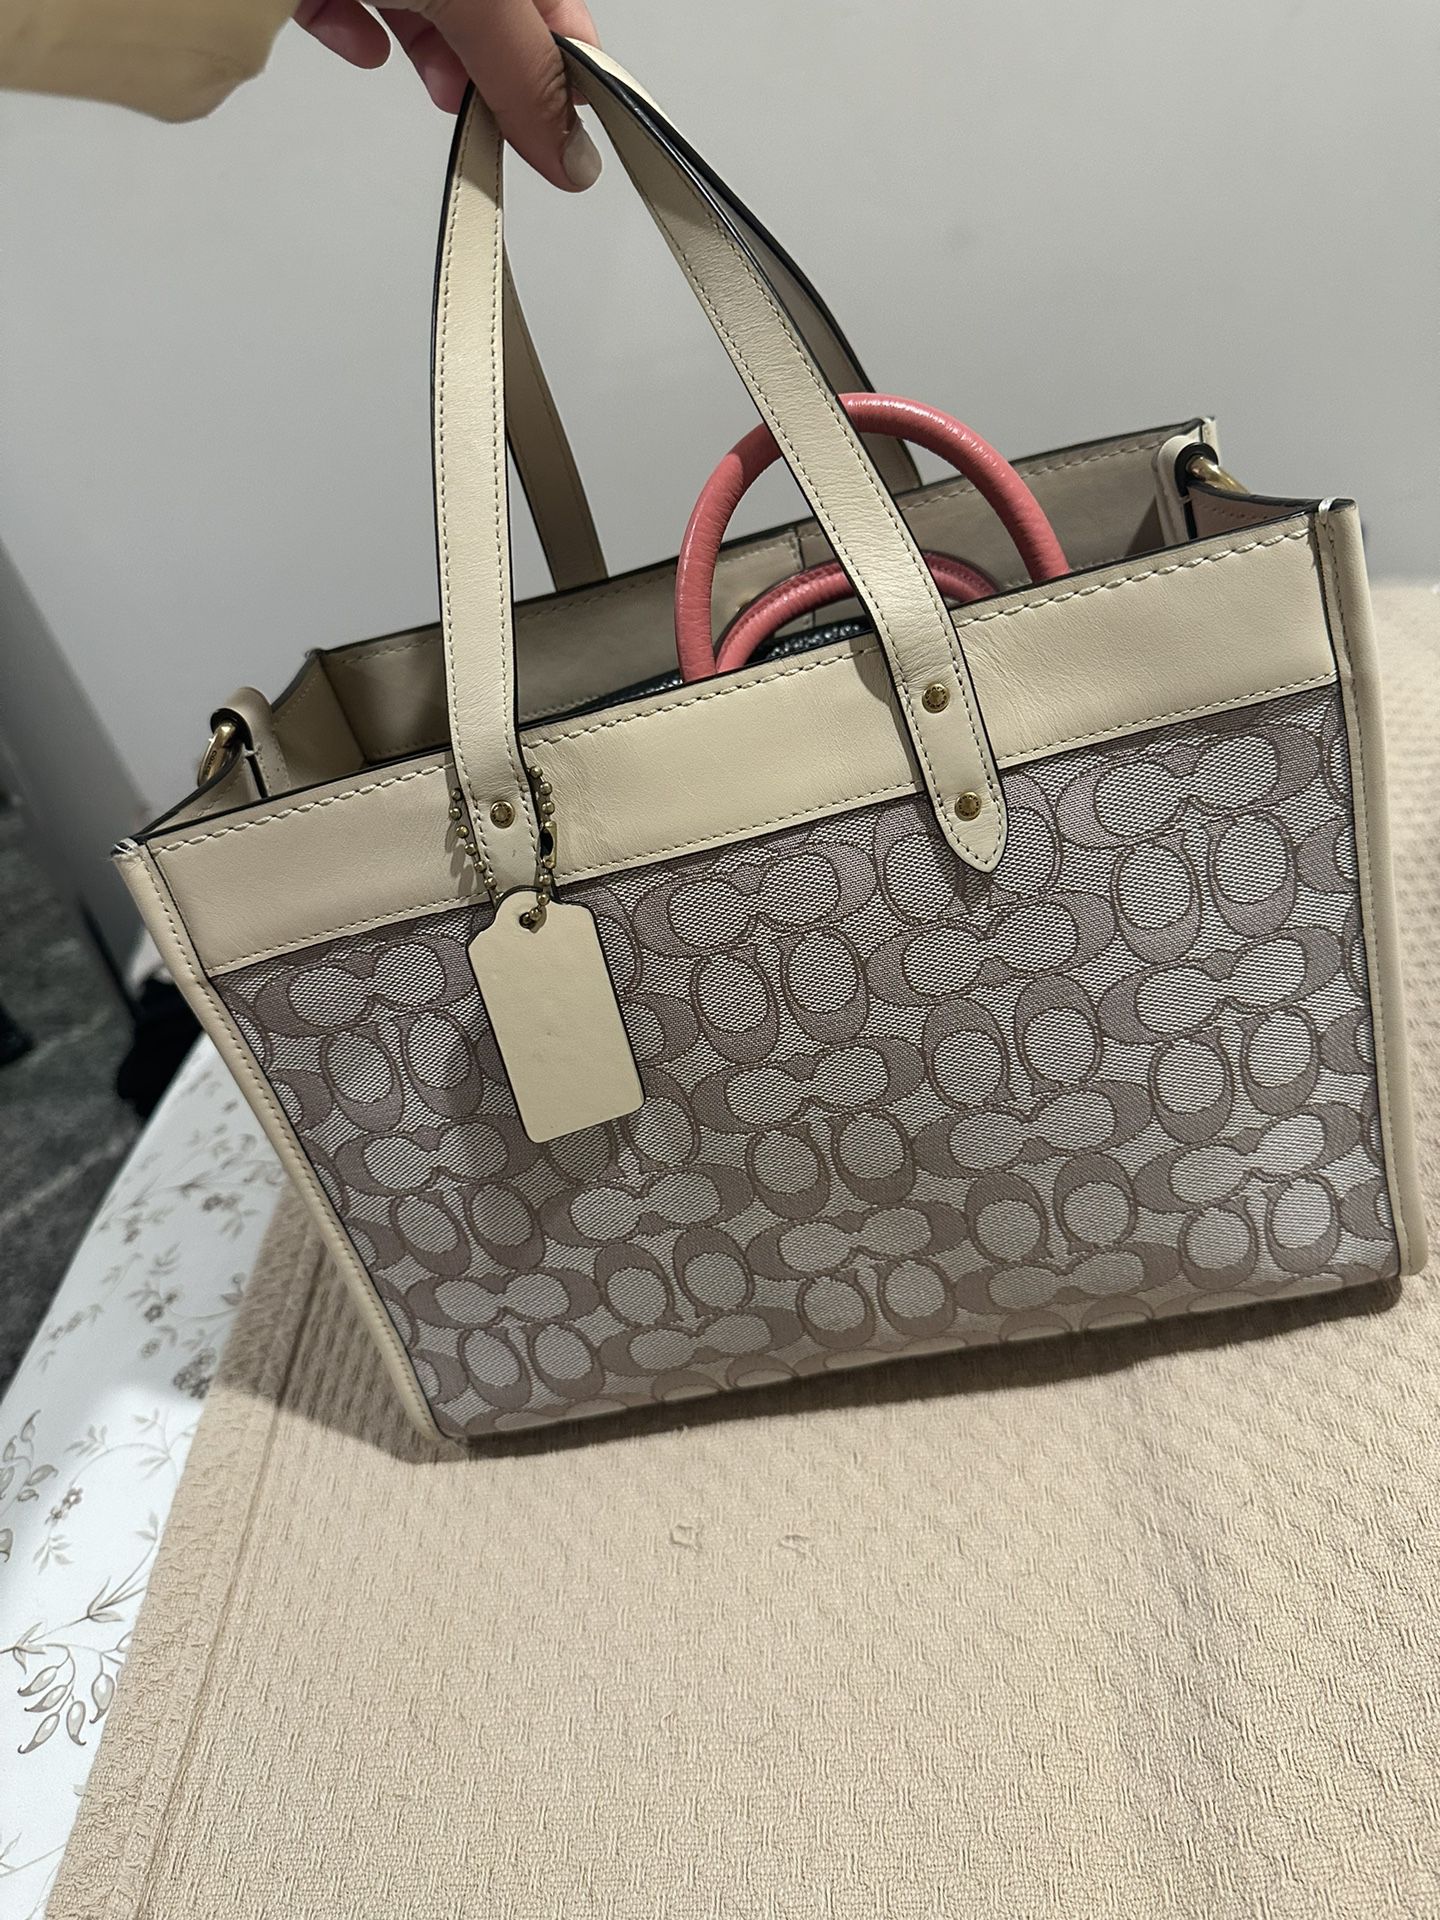 coach tote bag for Sale in San Diego, CA - OfferUp